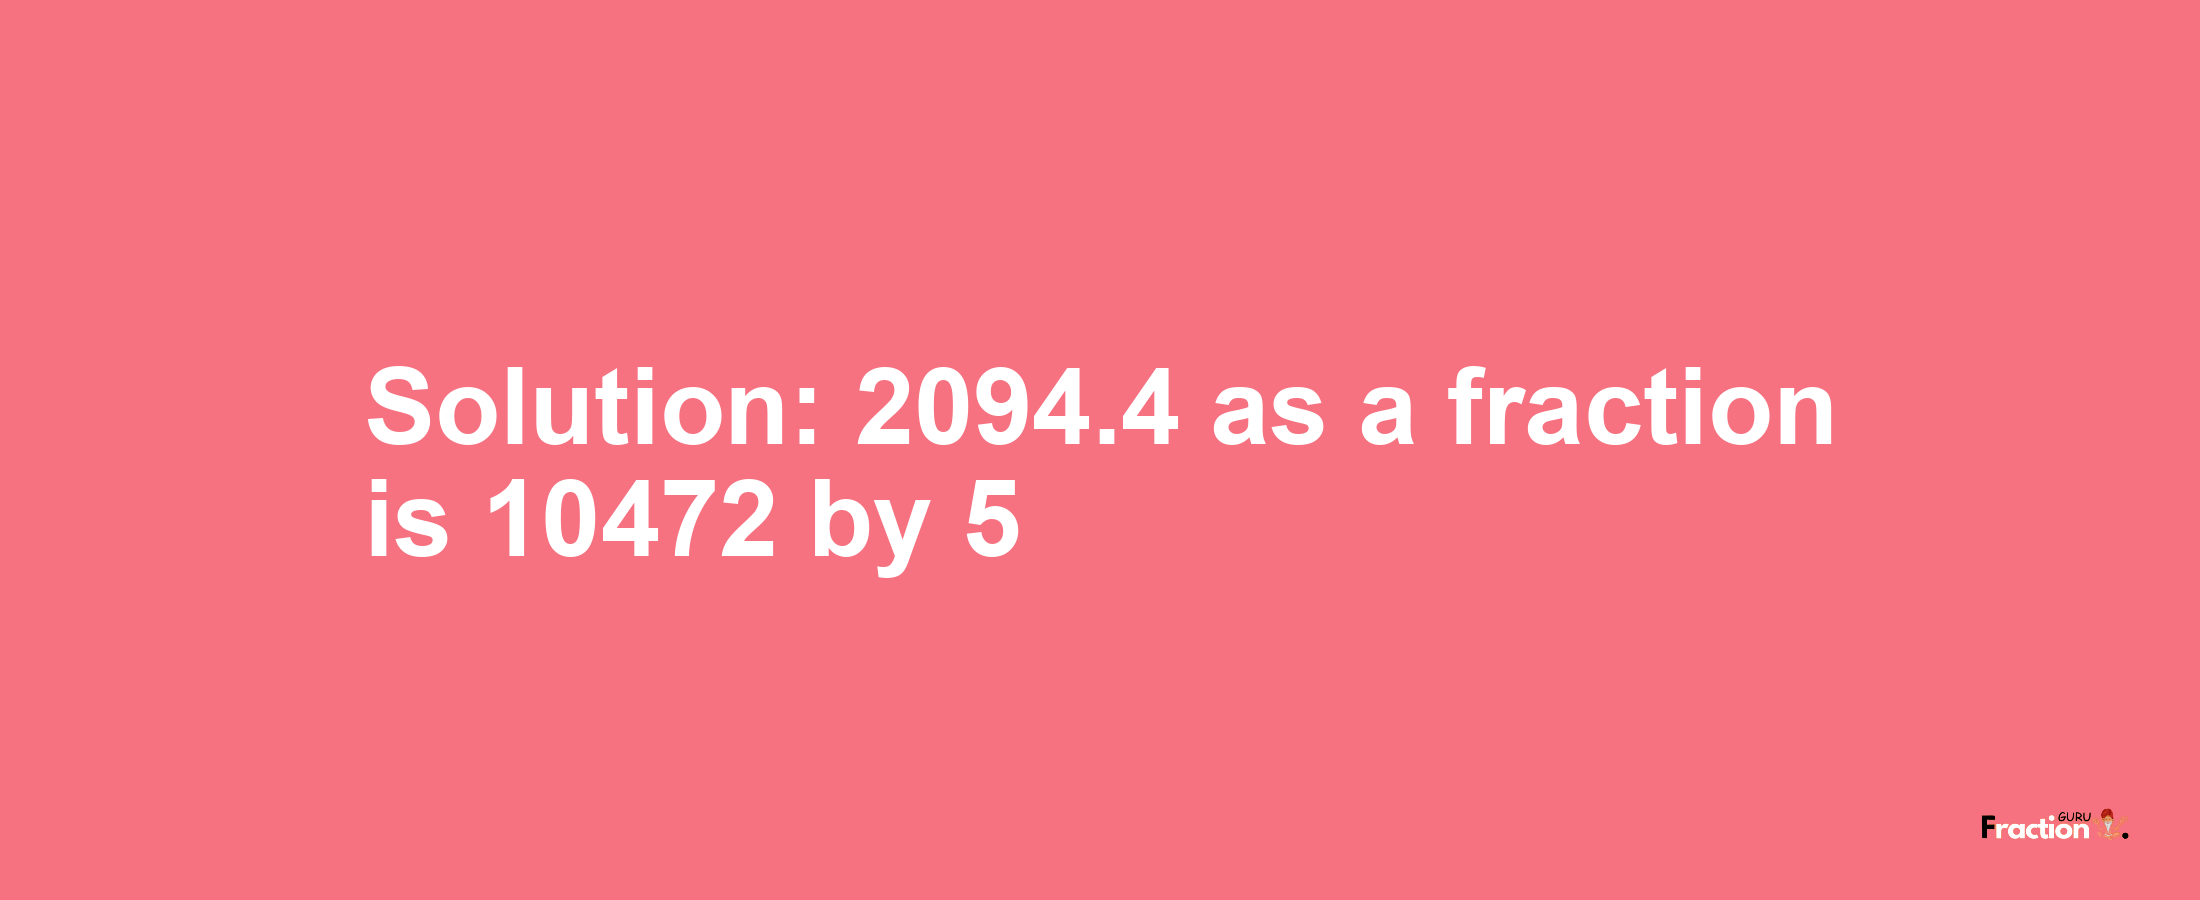 Solution:2094.4 as a fraction is 10472/5